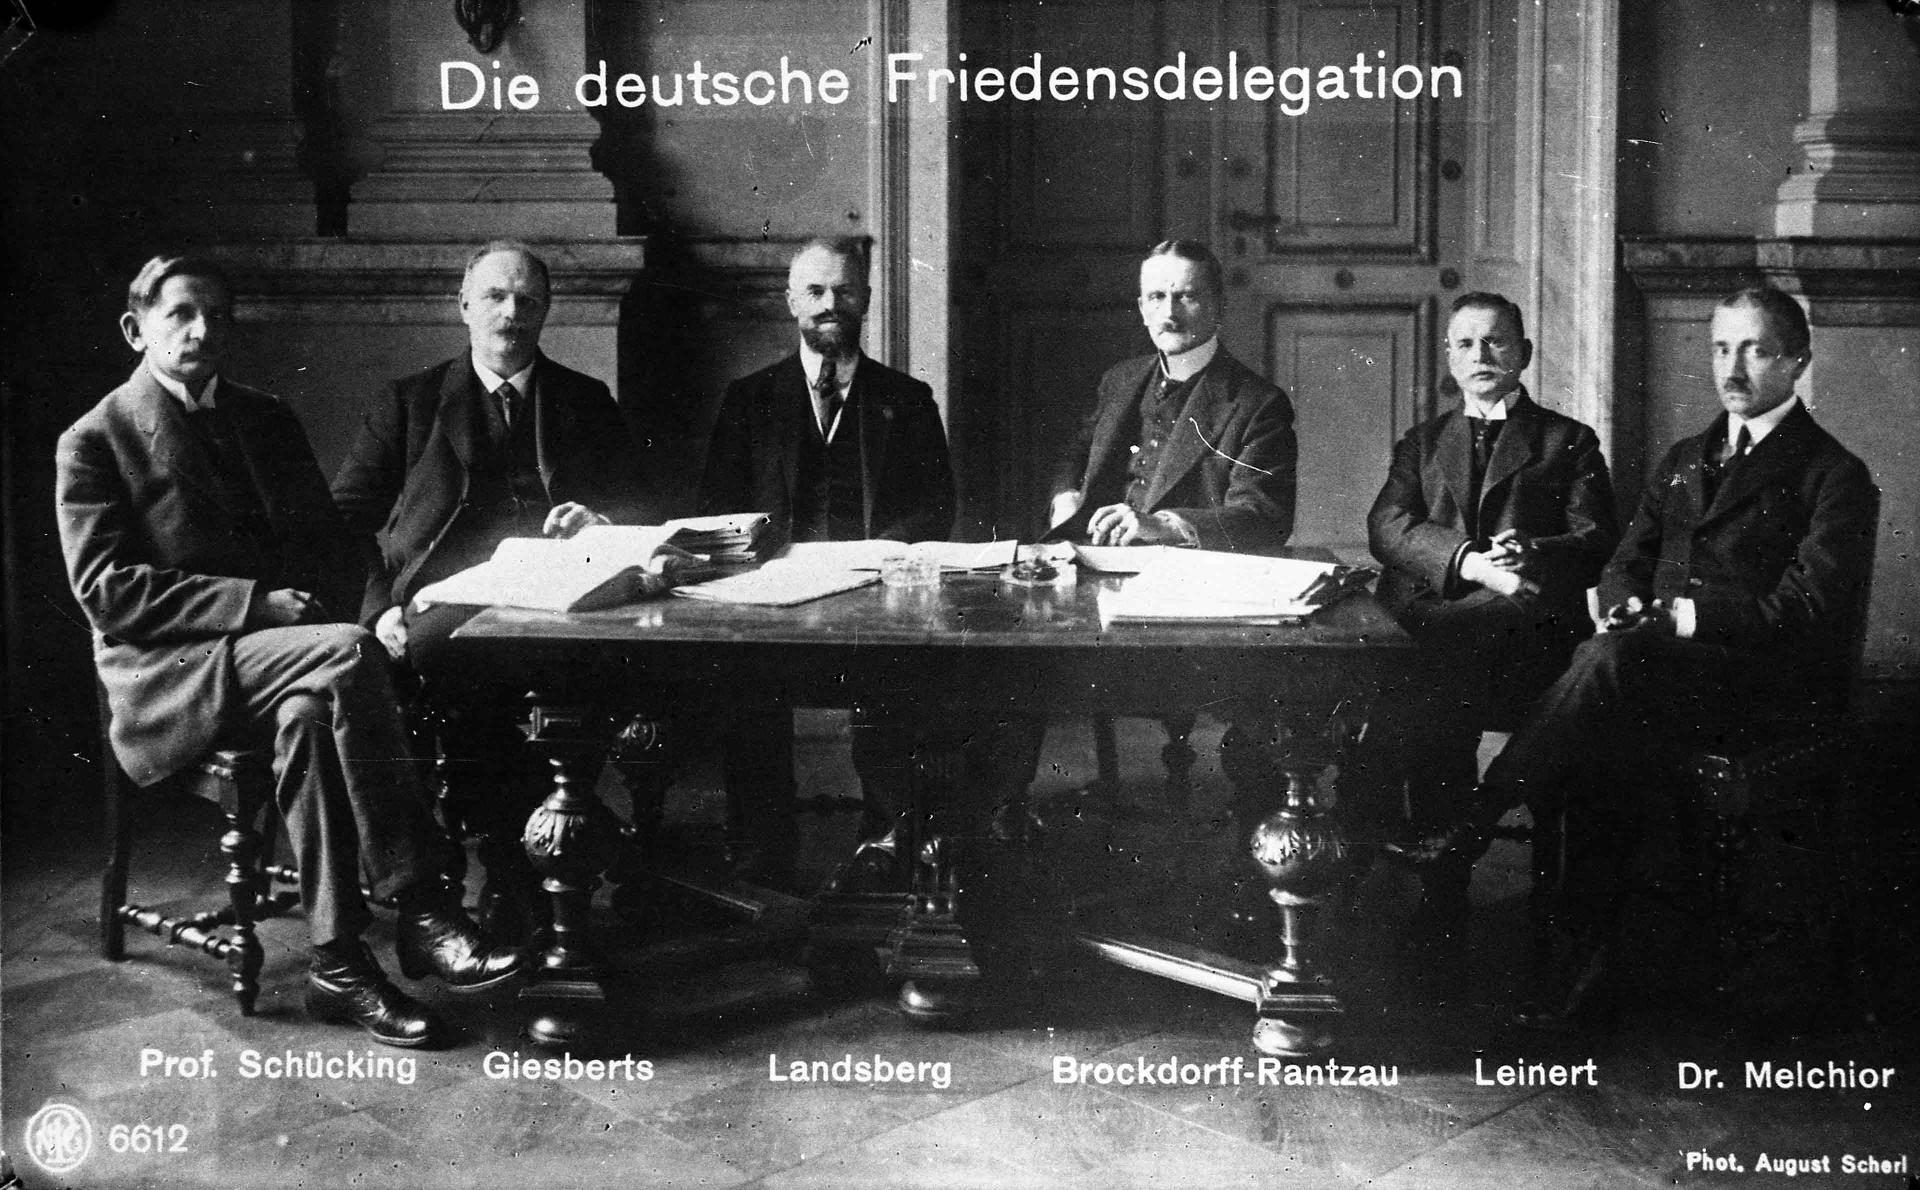 Group picture of the German peace delegation at Versailles around a table